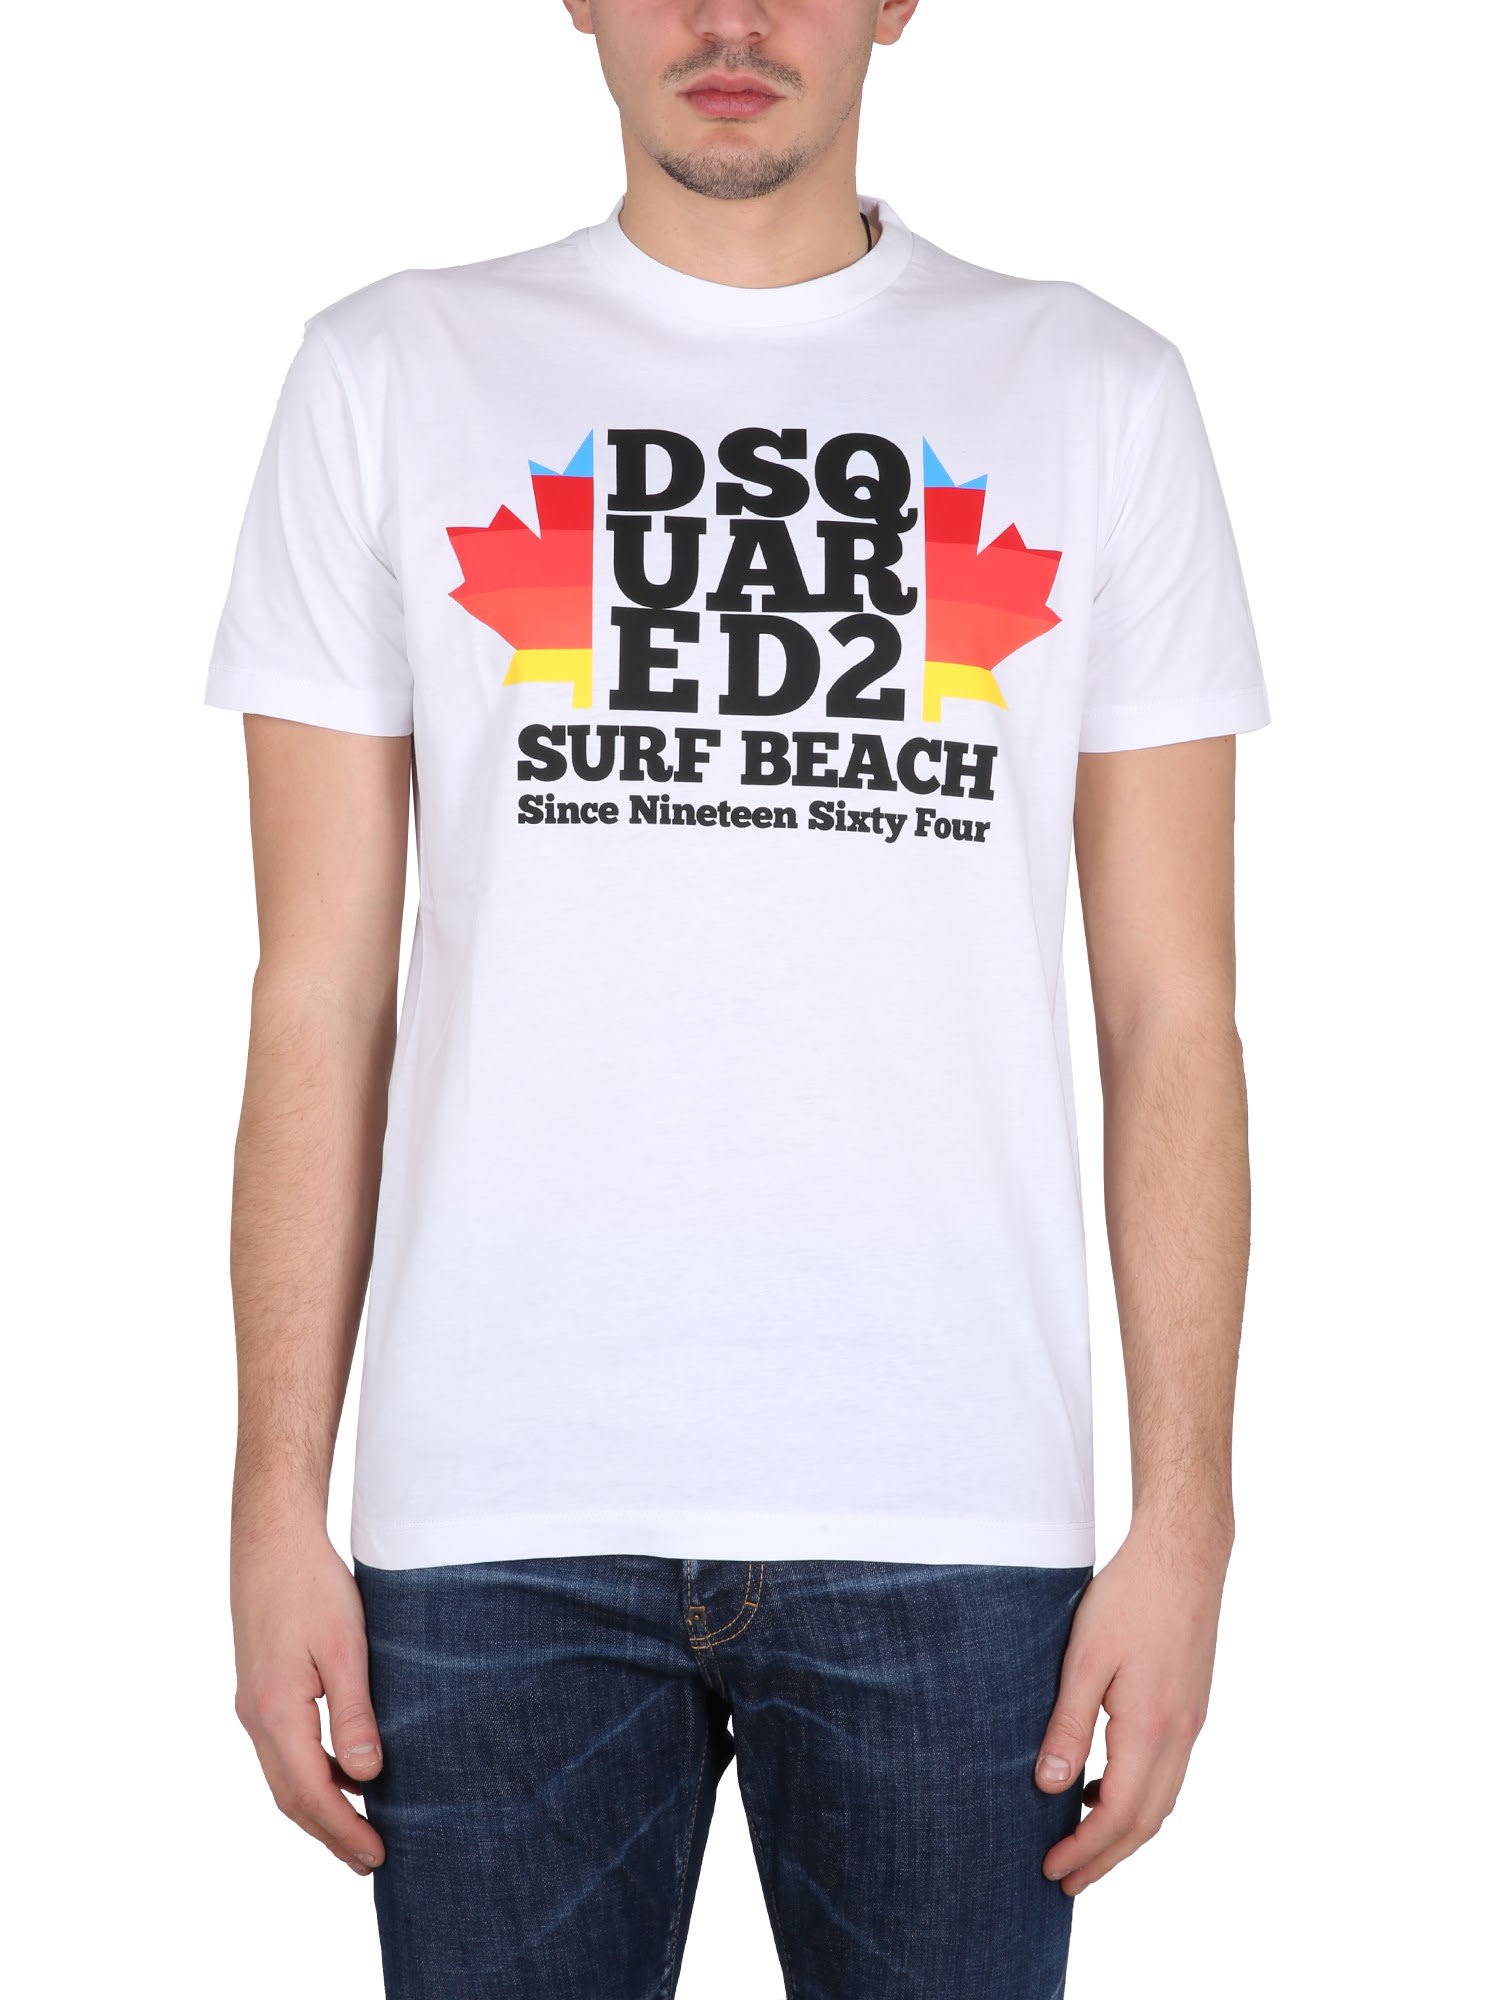 fusie Wanorde Slaapzaal Dsquared2 Surf Beach Cotton Jersey T-shirt In White | ModeSens